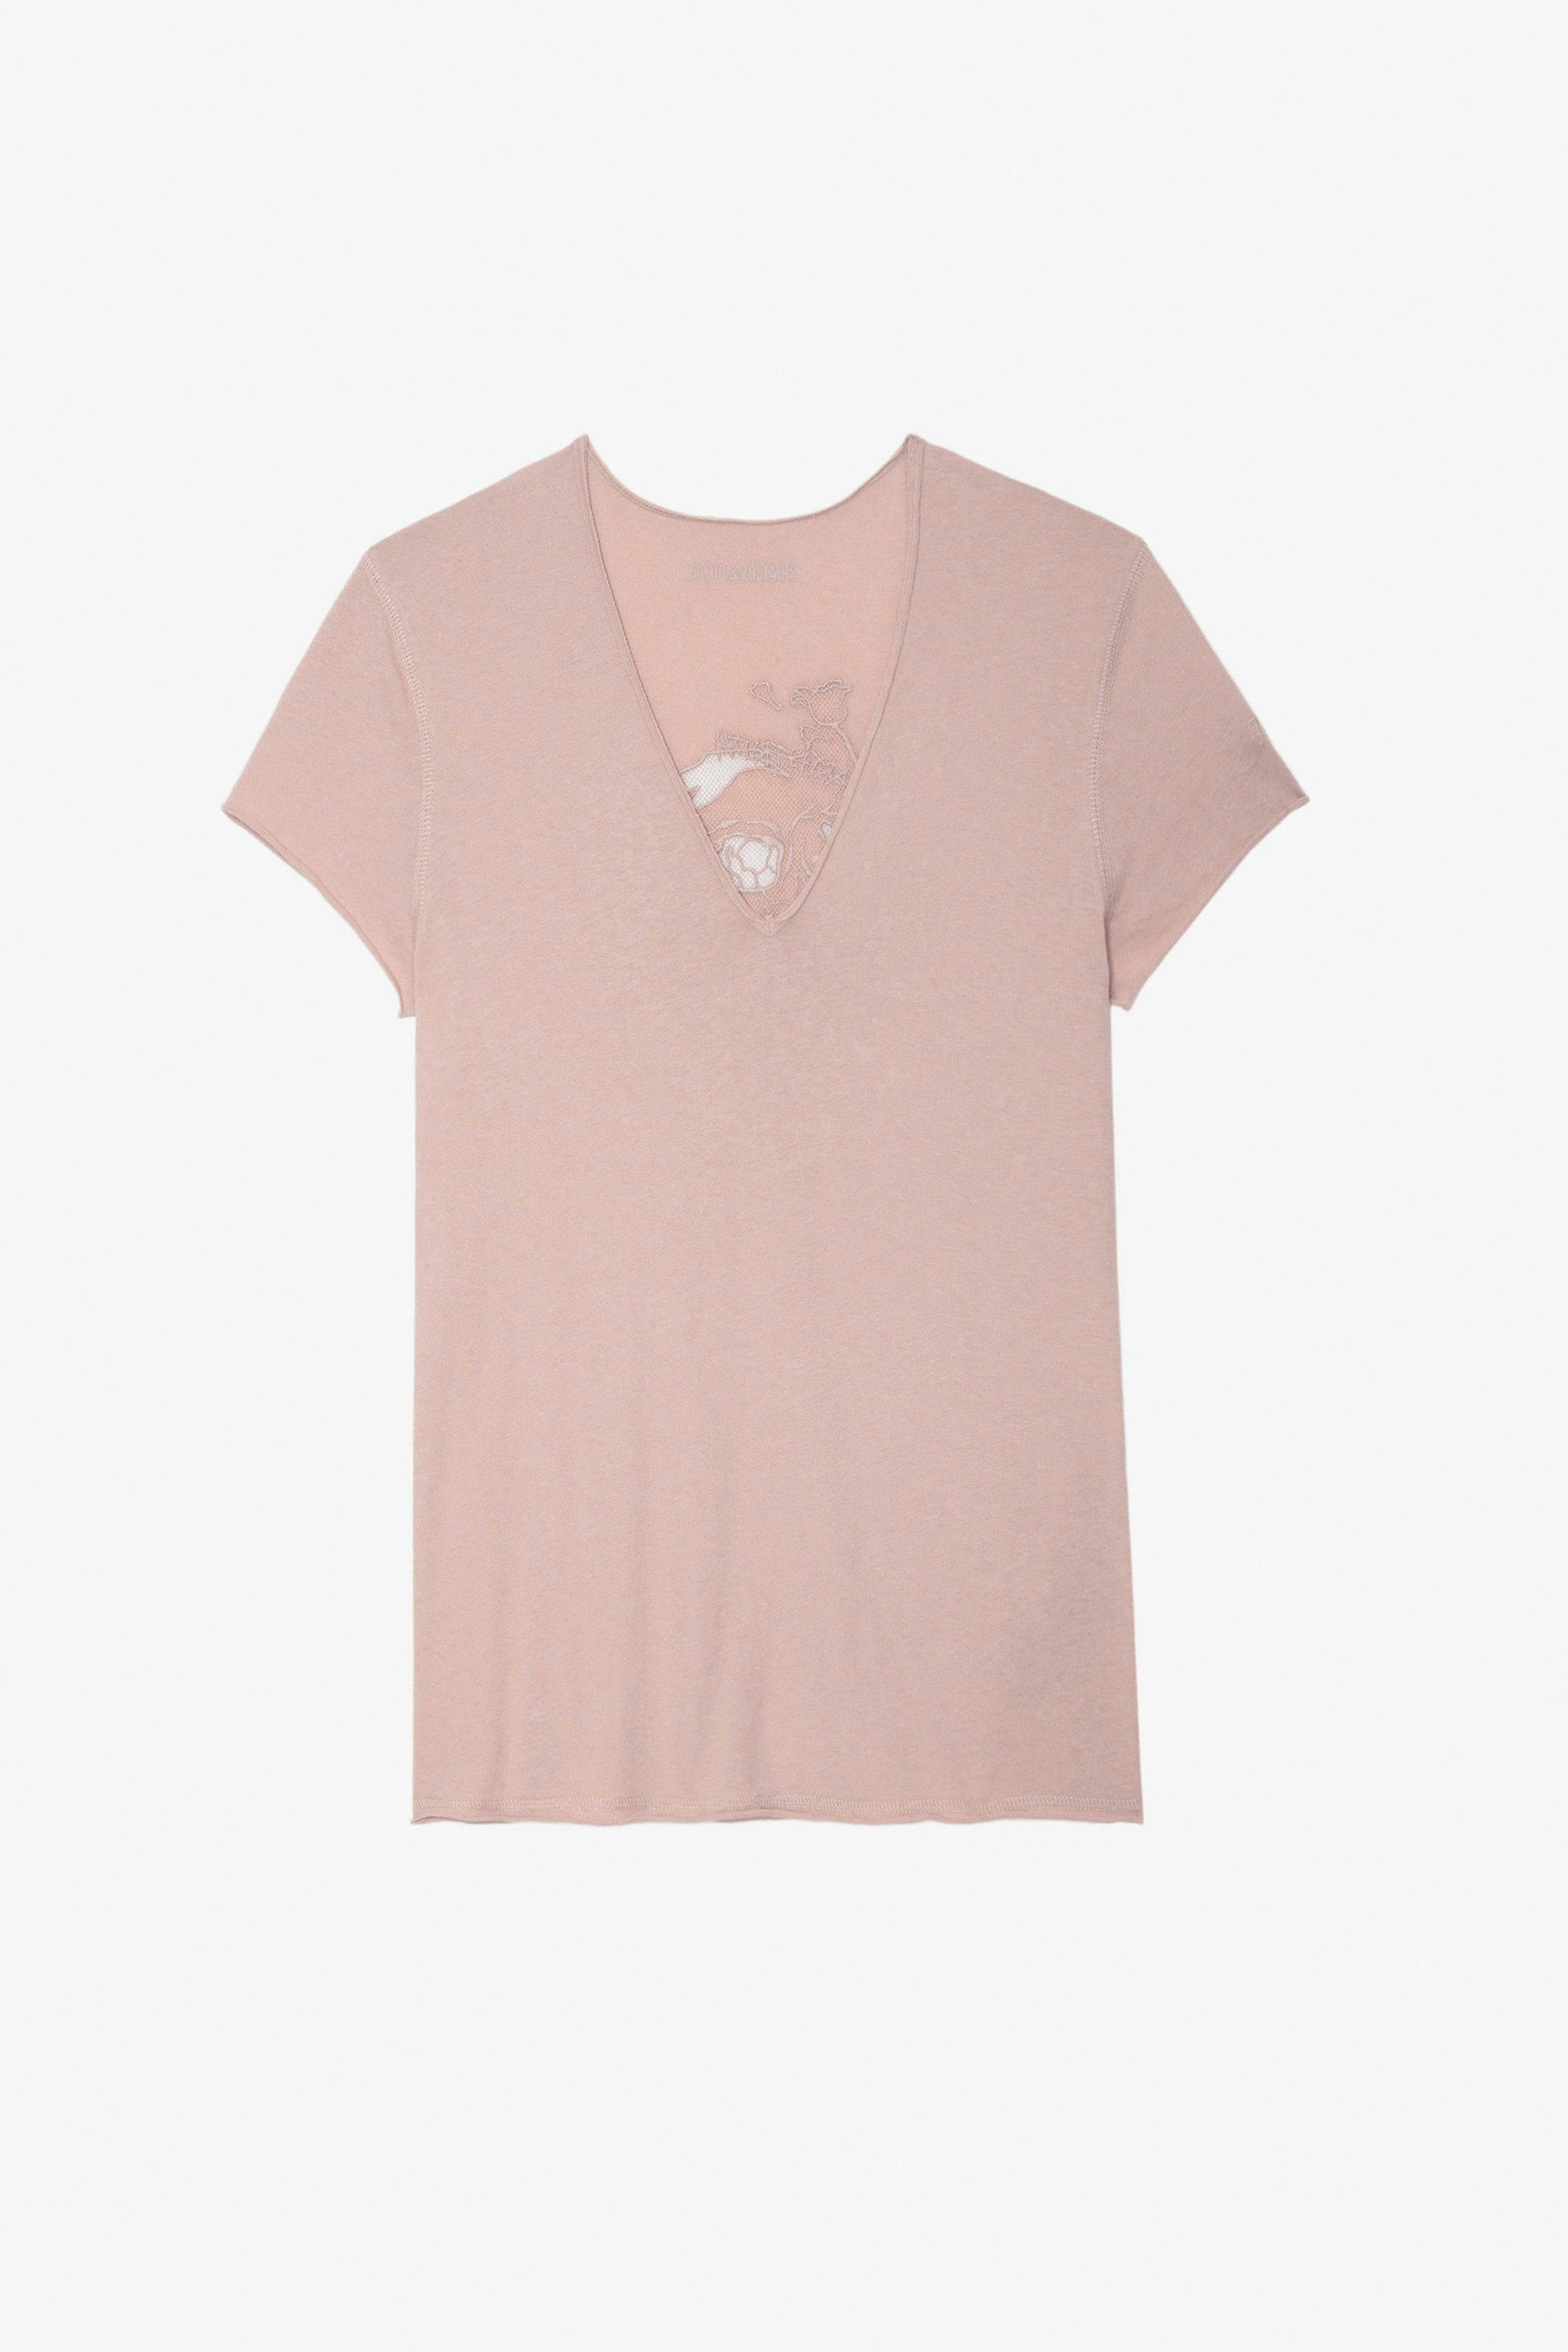 Story Fishnet T-Shirt - Women’s pink cotton T-shirt with skull and flowers embroidery on the back.